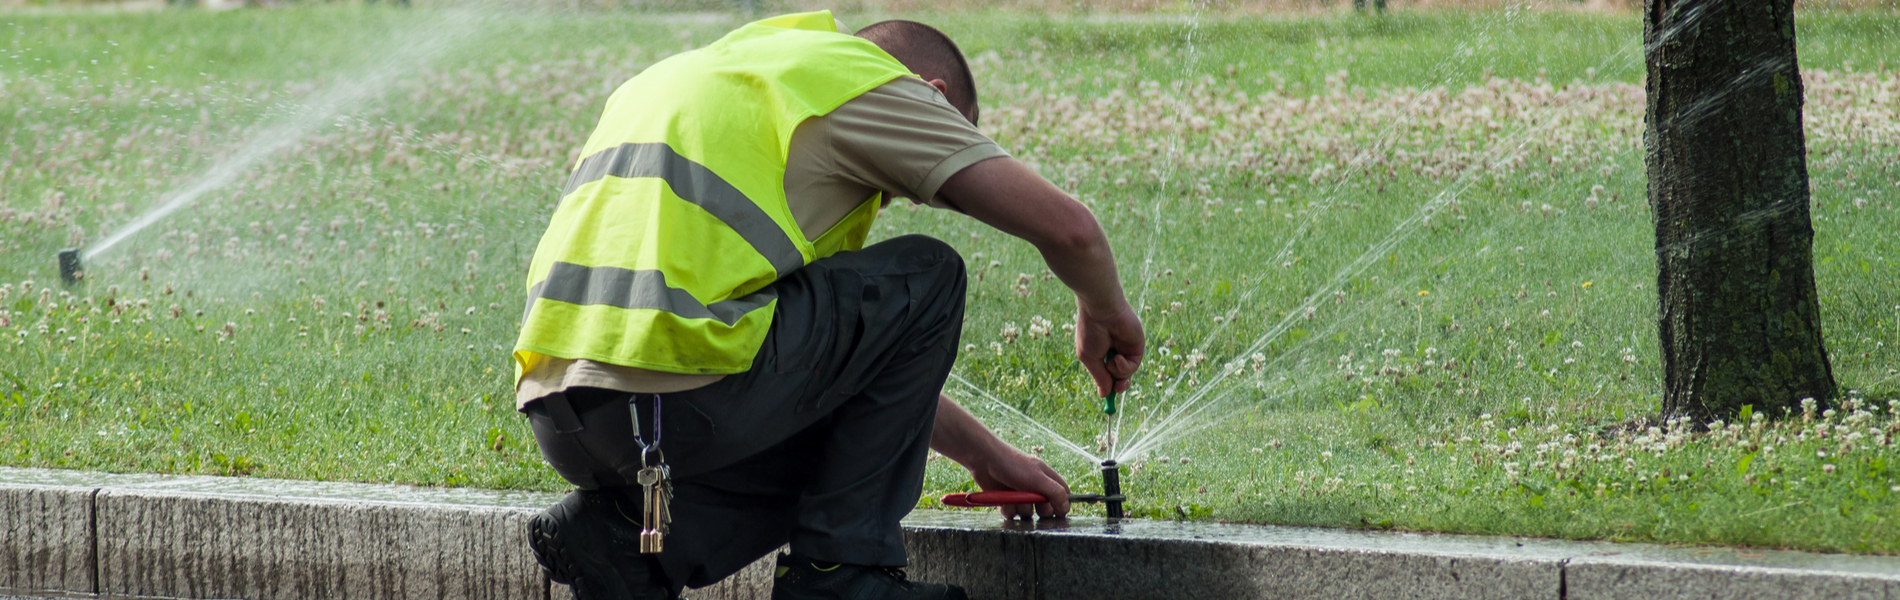 Sprinkler System Installation Maplewood, MO | Maplewood, MO area lawn care | Lawn Sprinklers of St. Louis